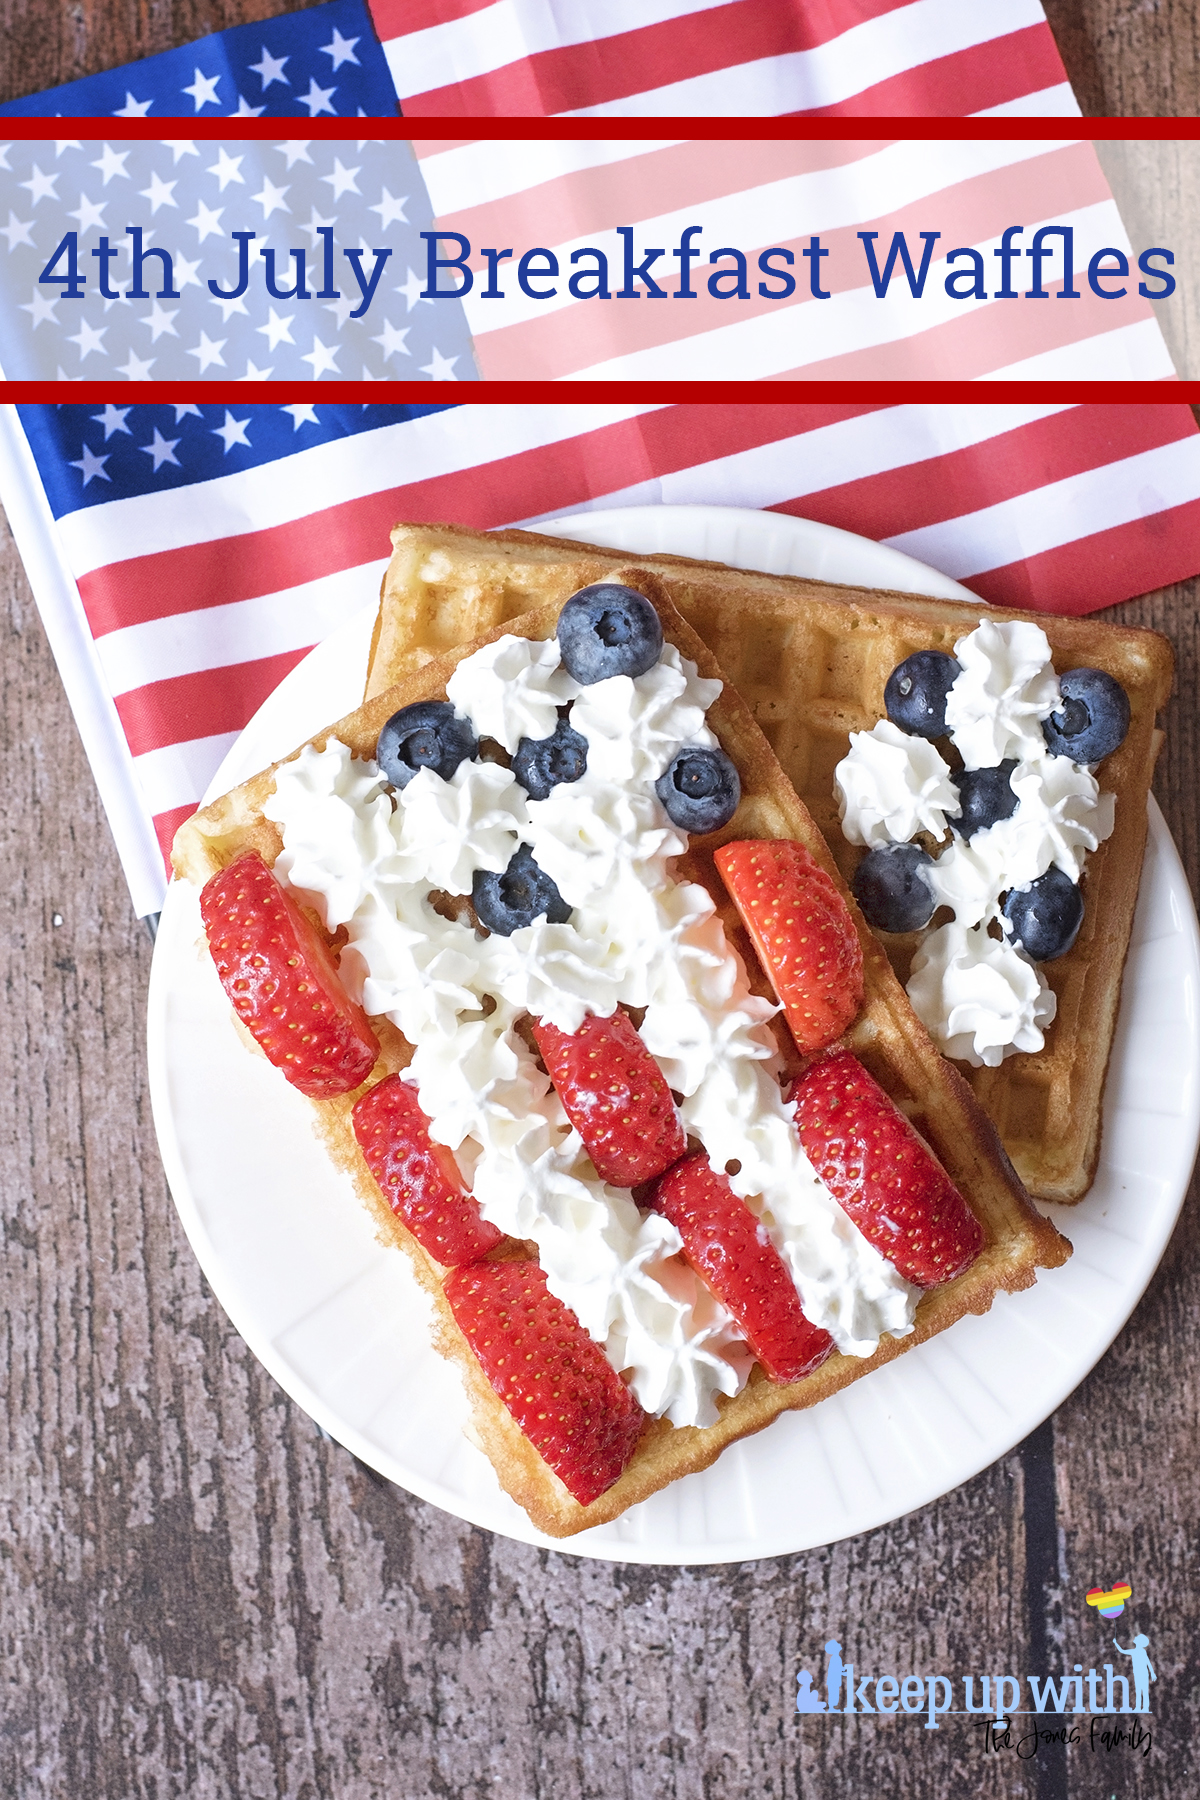 Image shows rectangular sweet breakfast waffles on a white vera wang plate. The waffles are decorated in the style of the American Flag. There are sliced strawberries for the red stripes, blueberries for the space around the stars, and cream piped as the white stars and stripes. The plate is set on a dark hardwood background and there is a small American Flag next to it. Image by Sara-Jayne Jones, Keep Up With The Jones Family.